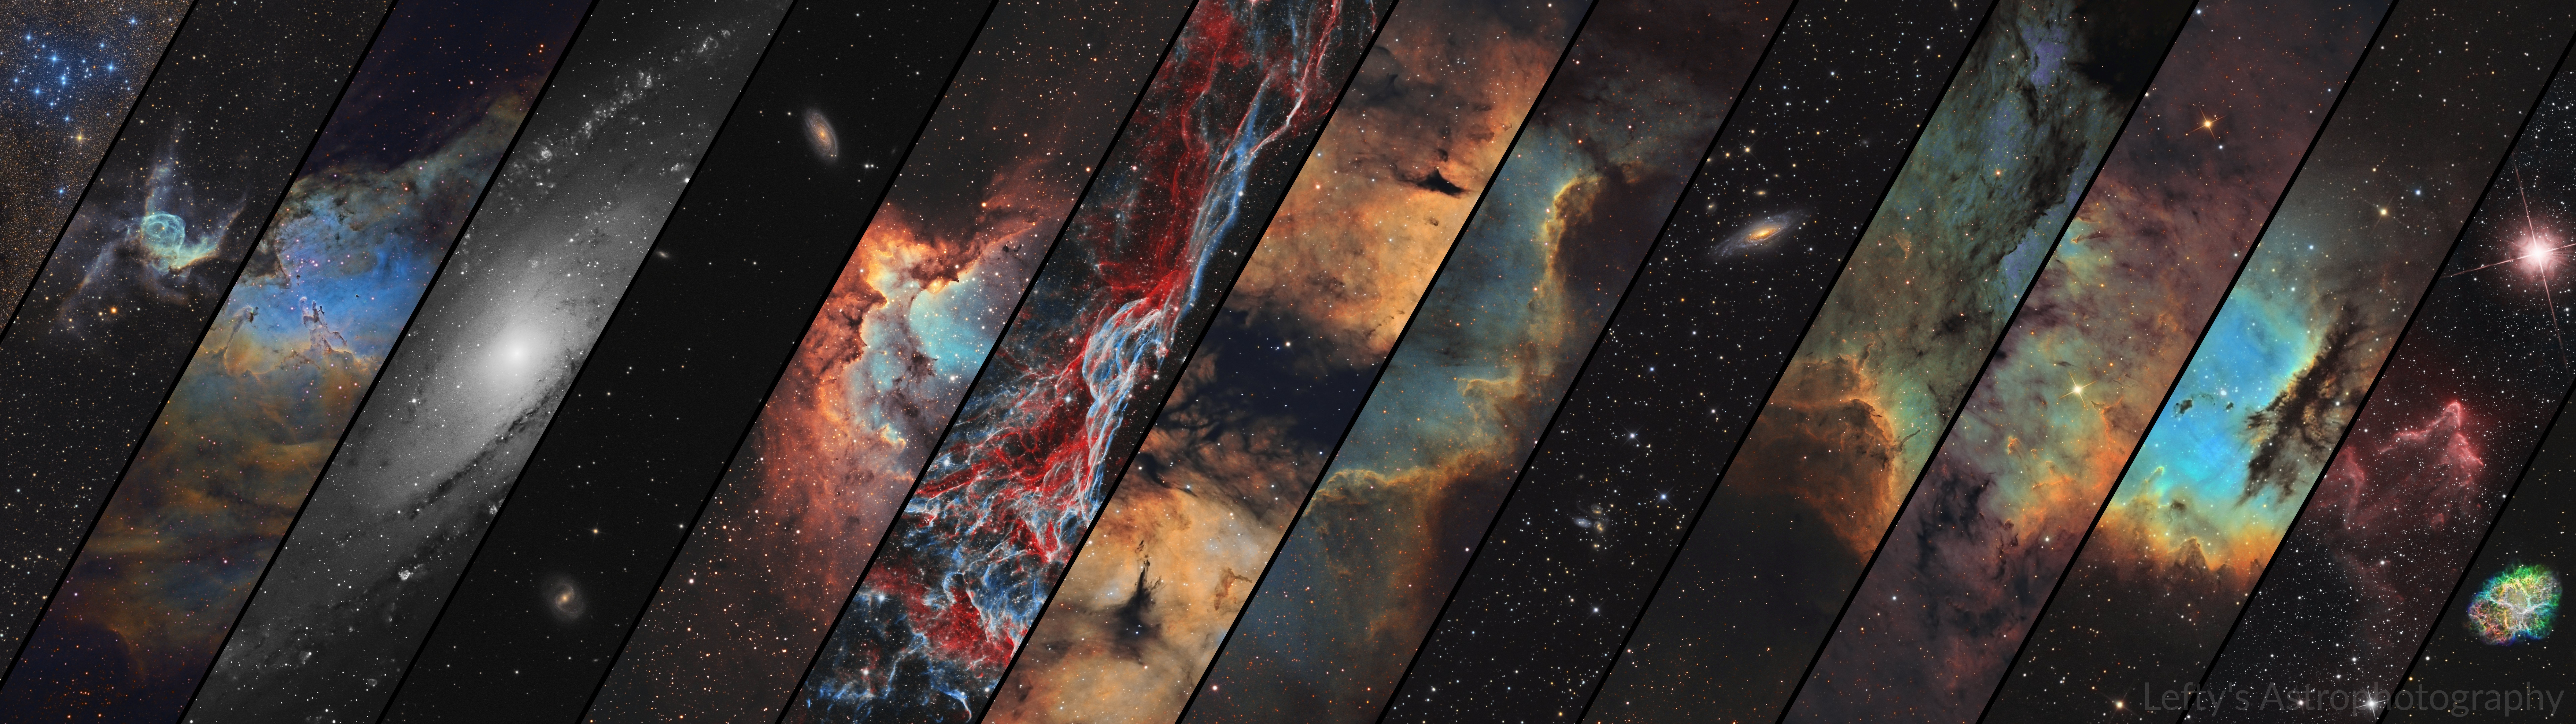 A dual 8K wallpaper of some of my favorite Deep Sky Objects I photographed throughout 2020. This image represents over 180 hours of long exposure time